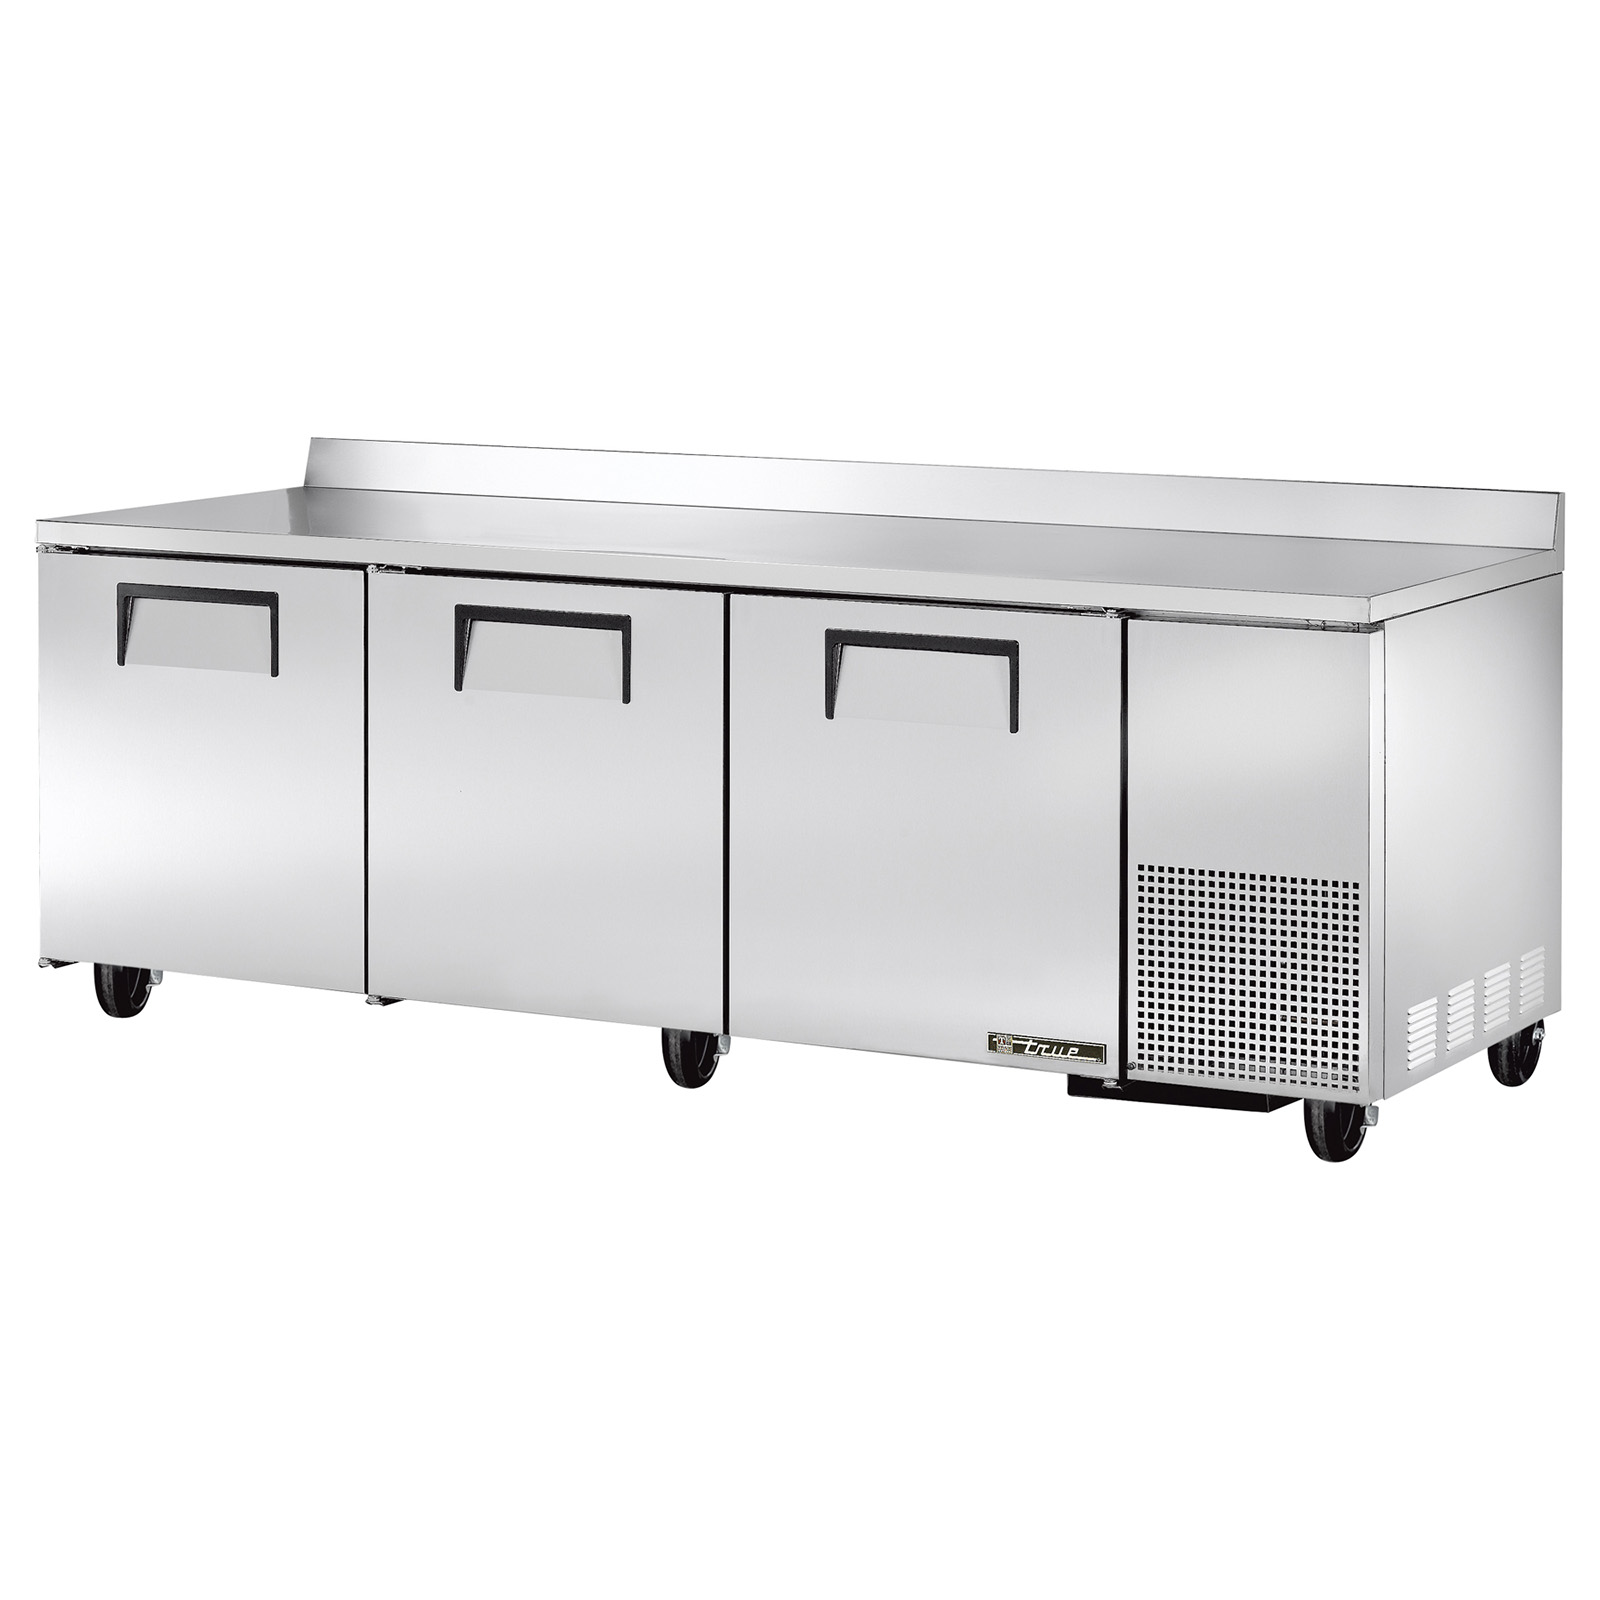 True Food Service Equipment TWT-93 Refrigerated Counter, Work Top